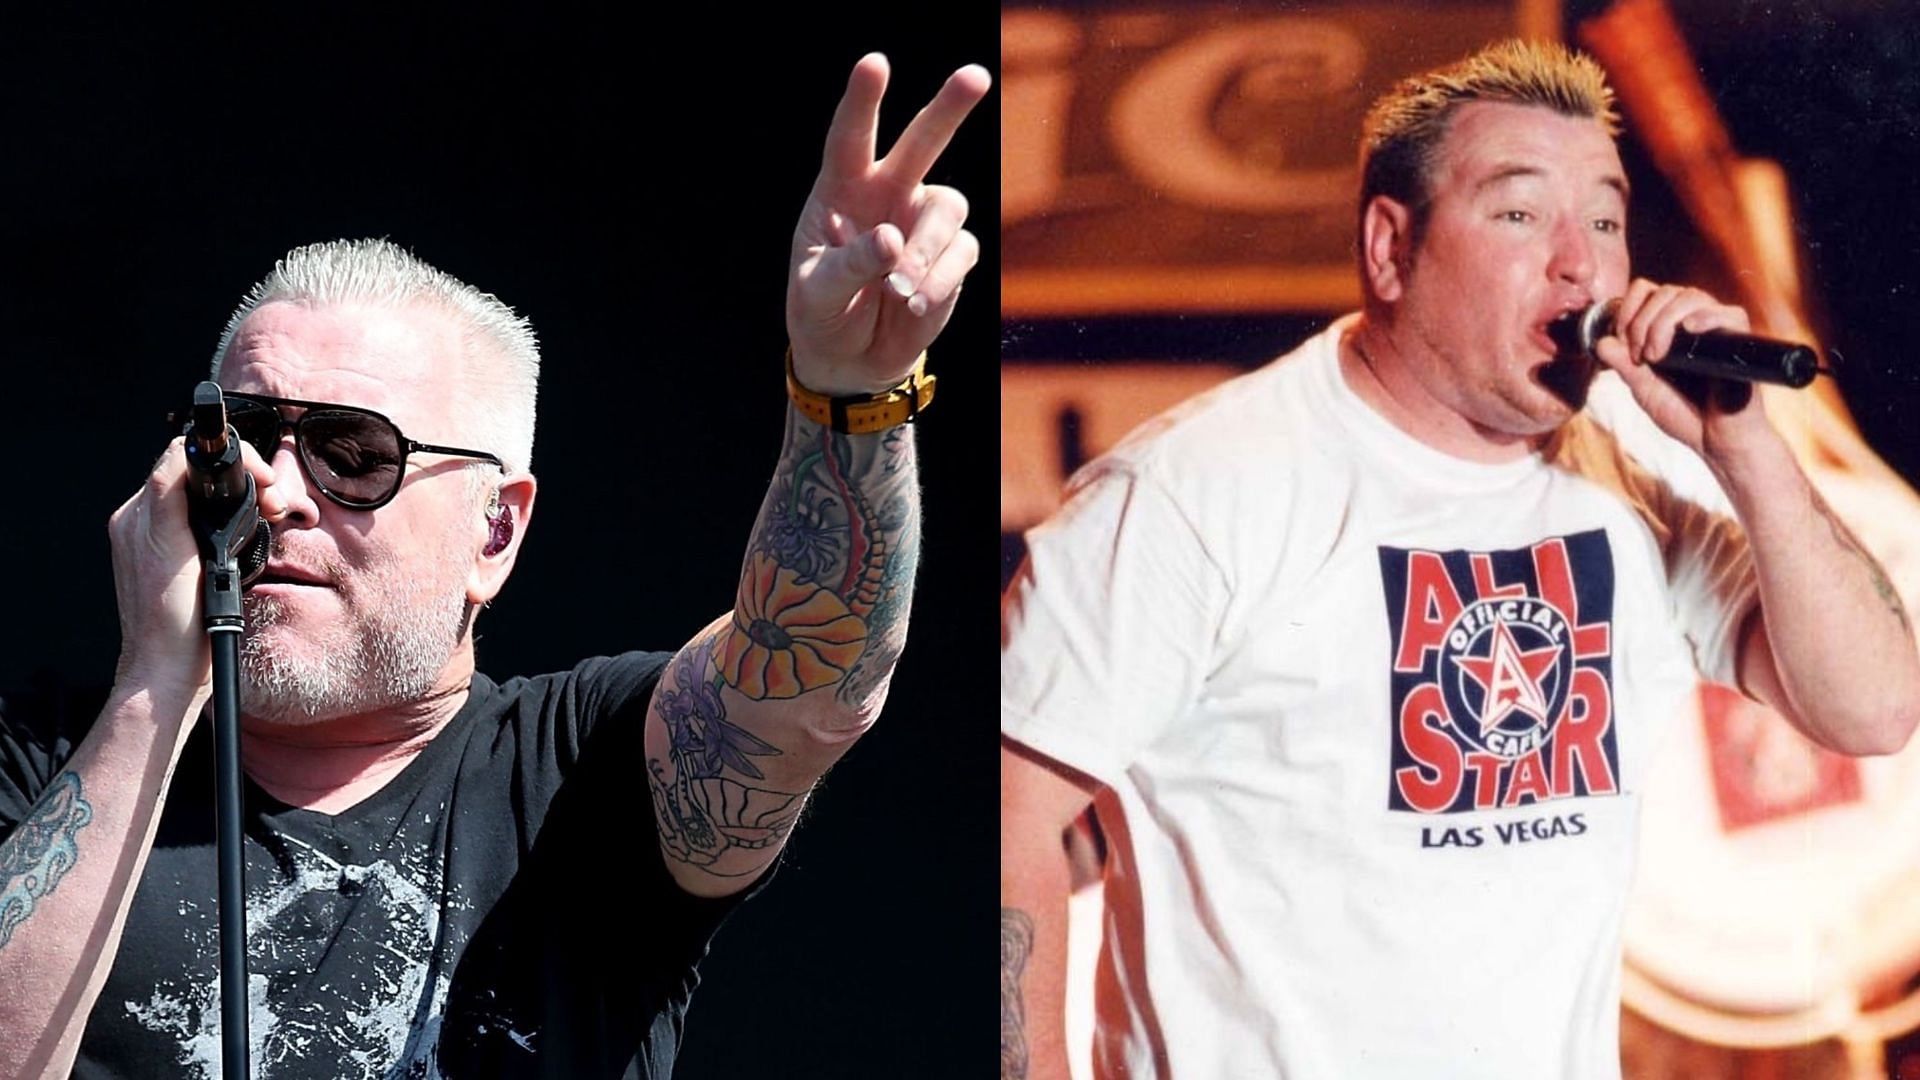 Steve Harwell from the band Smash Mouth has died at the age of 56. (Images via Getty Images)